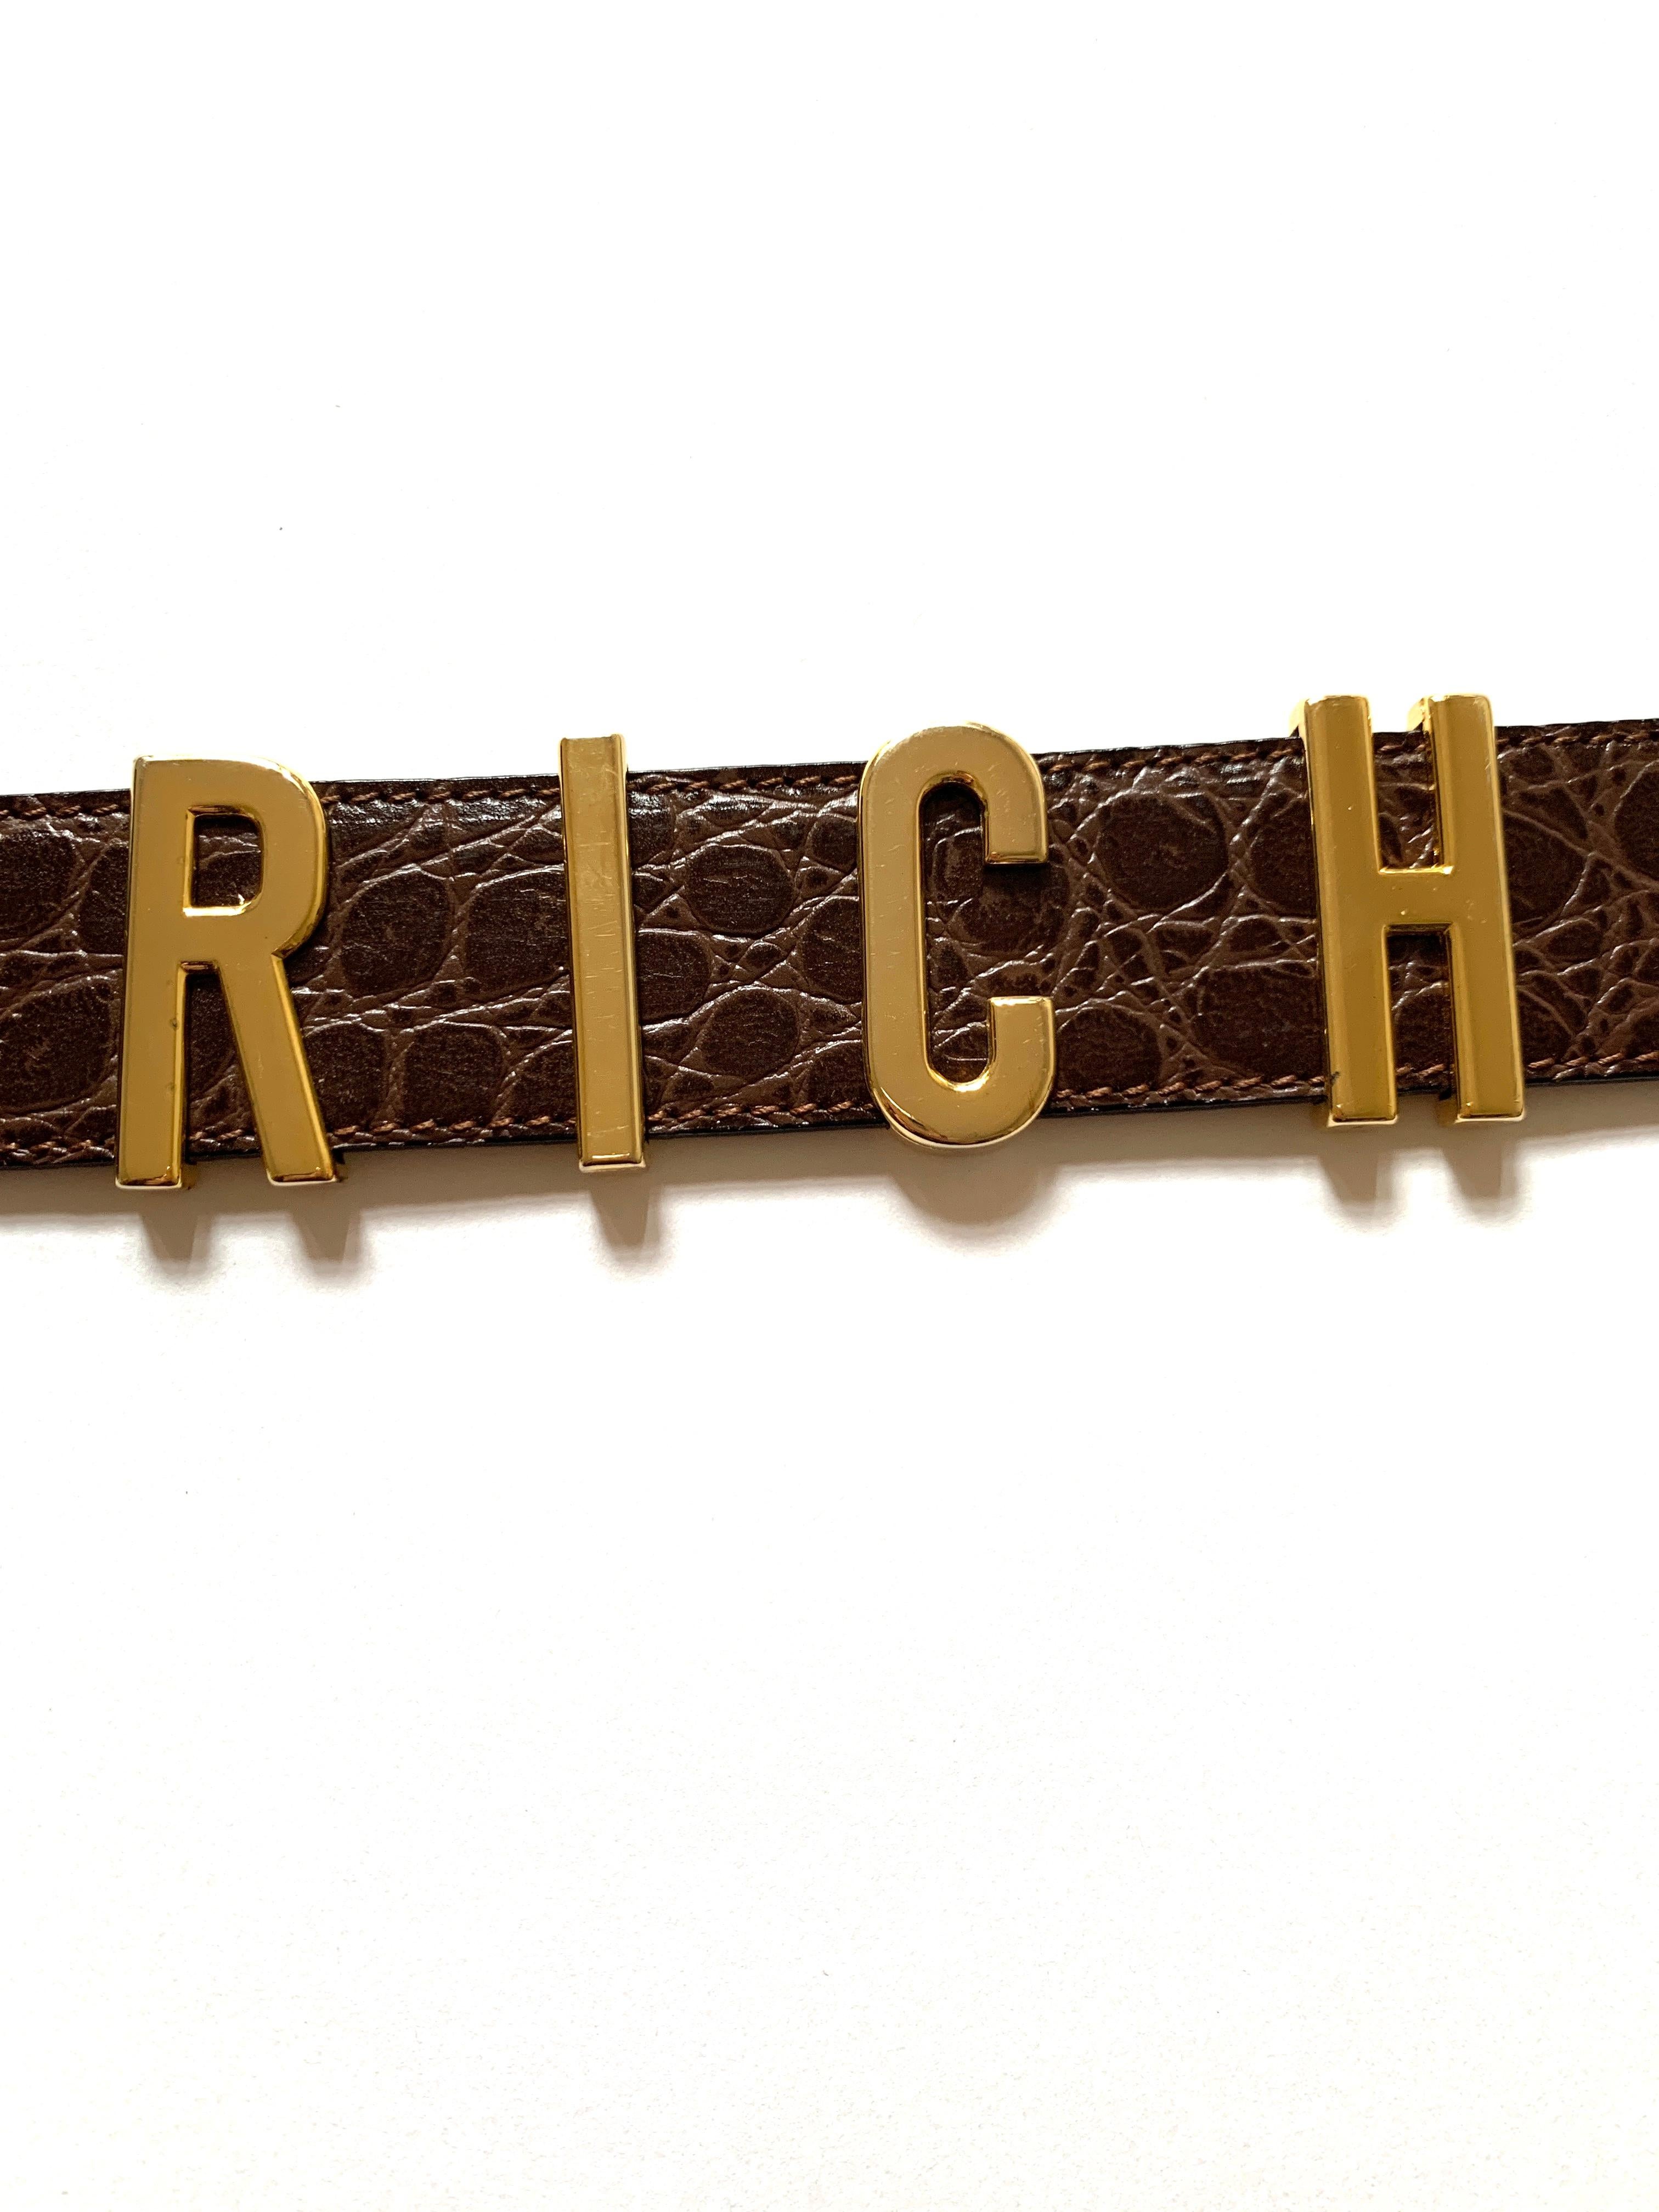 Women's 1990s Moschino Redwall Belt I Am Rich in Gold Letters on Brown Embossed Leather For Sale